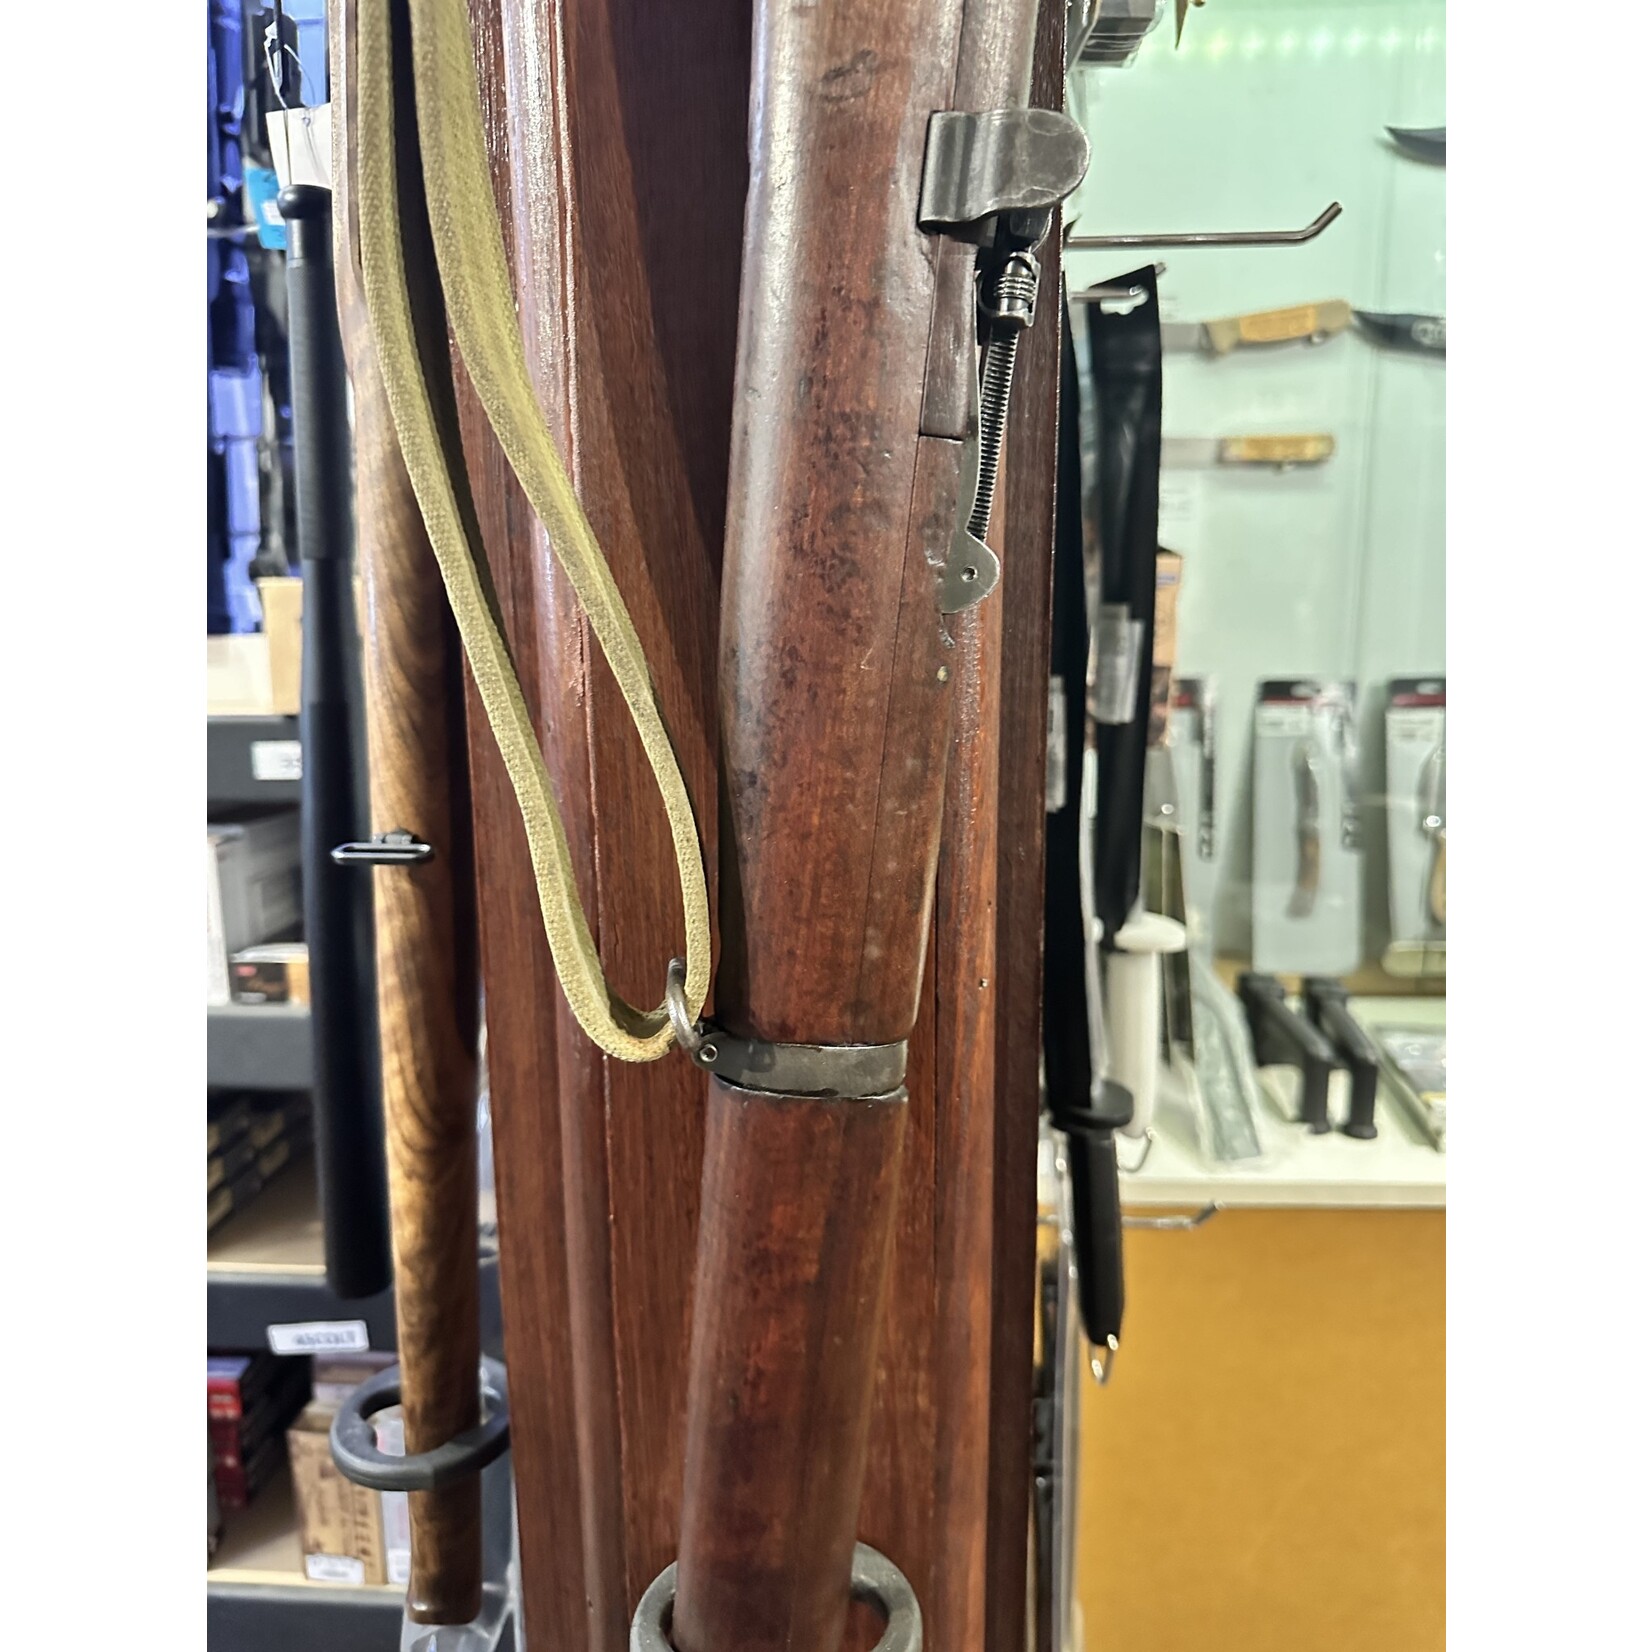 Lithgow Pre Owned Lithgow 303Brit SMLE 1945 (No 1) Mk III* - 660mm Barrel